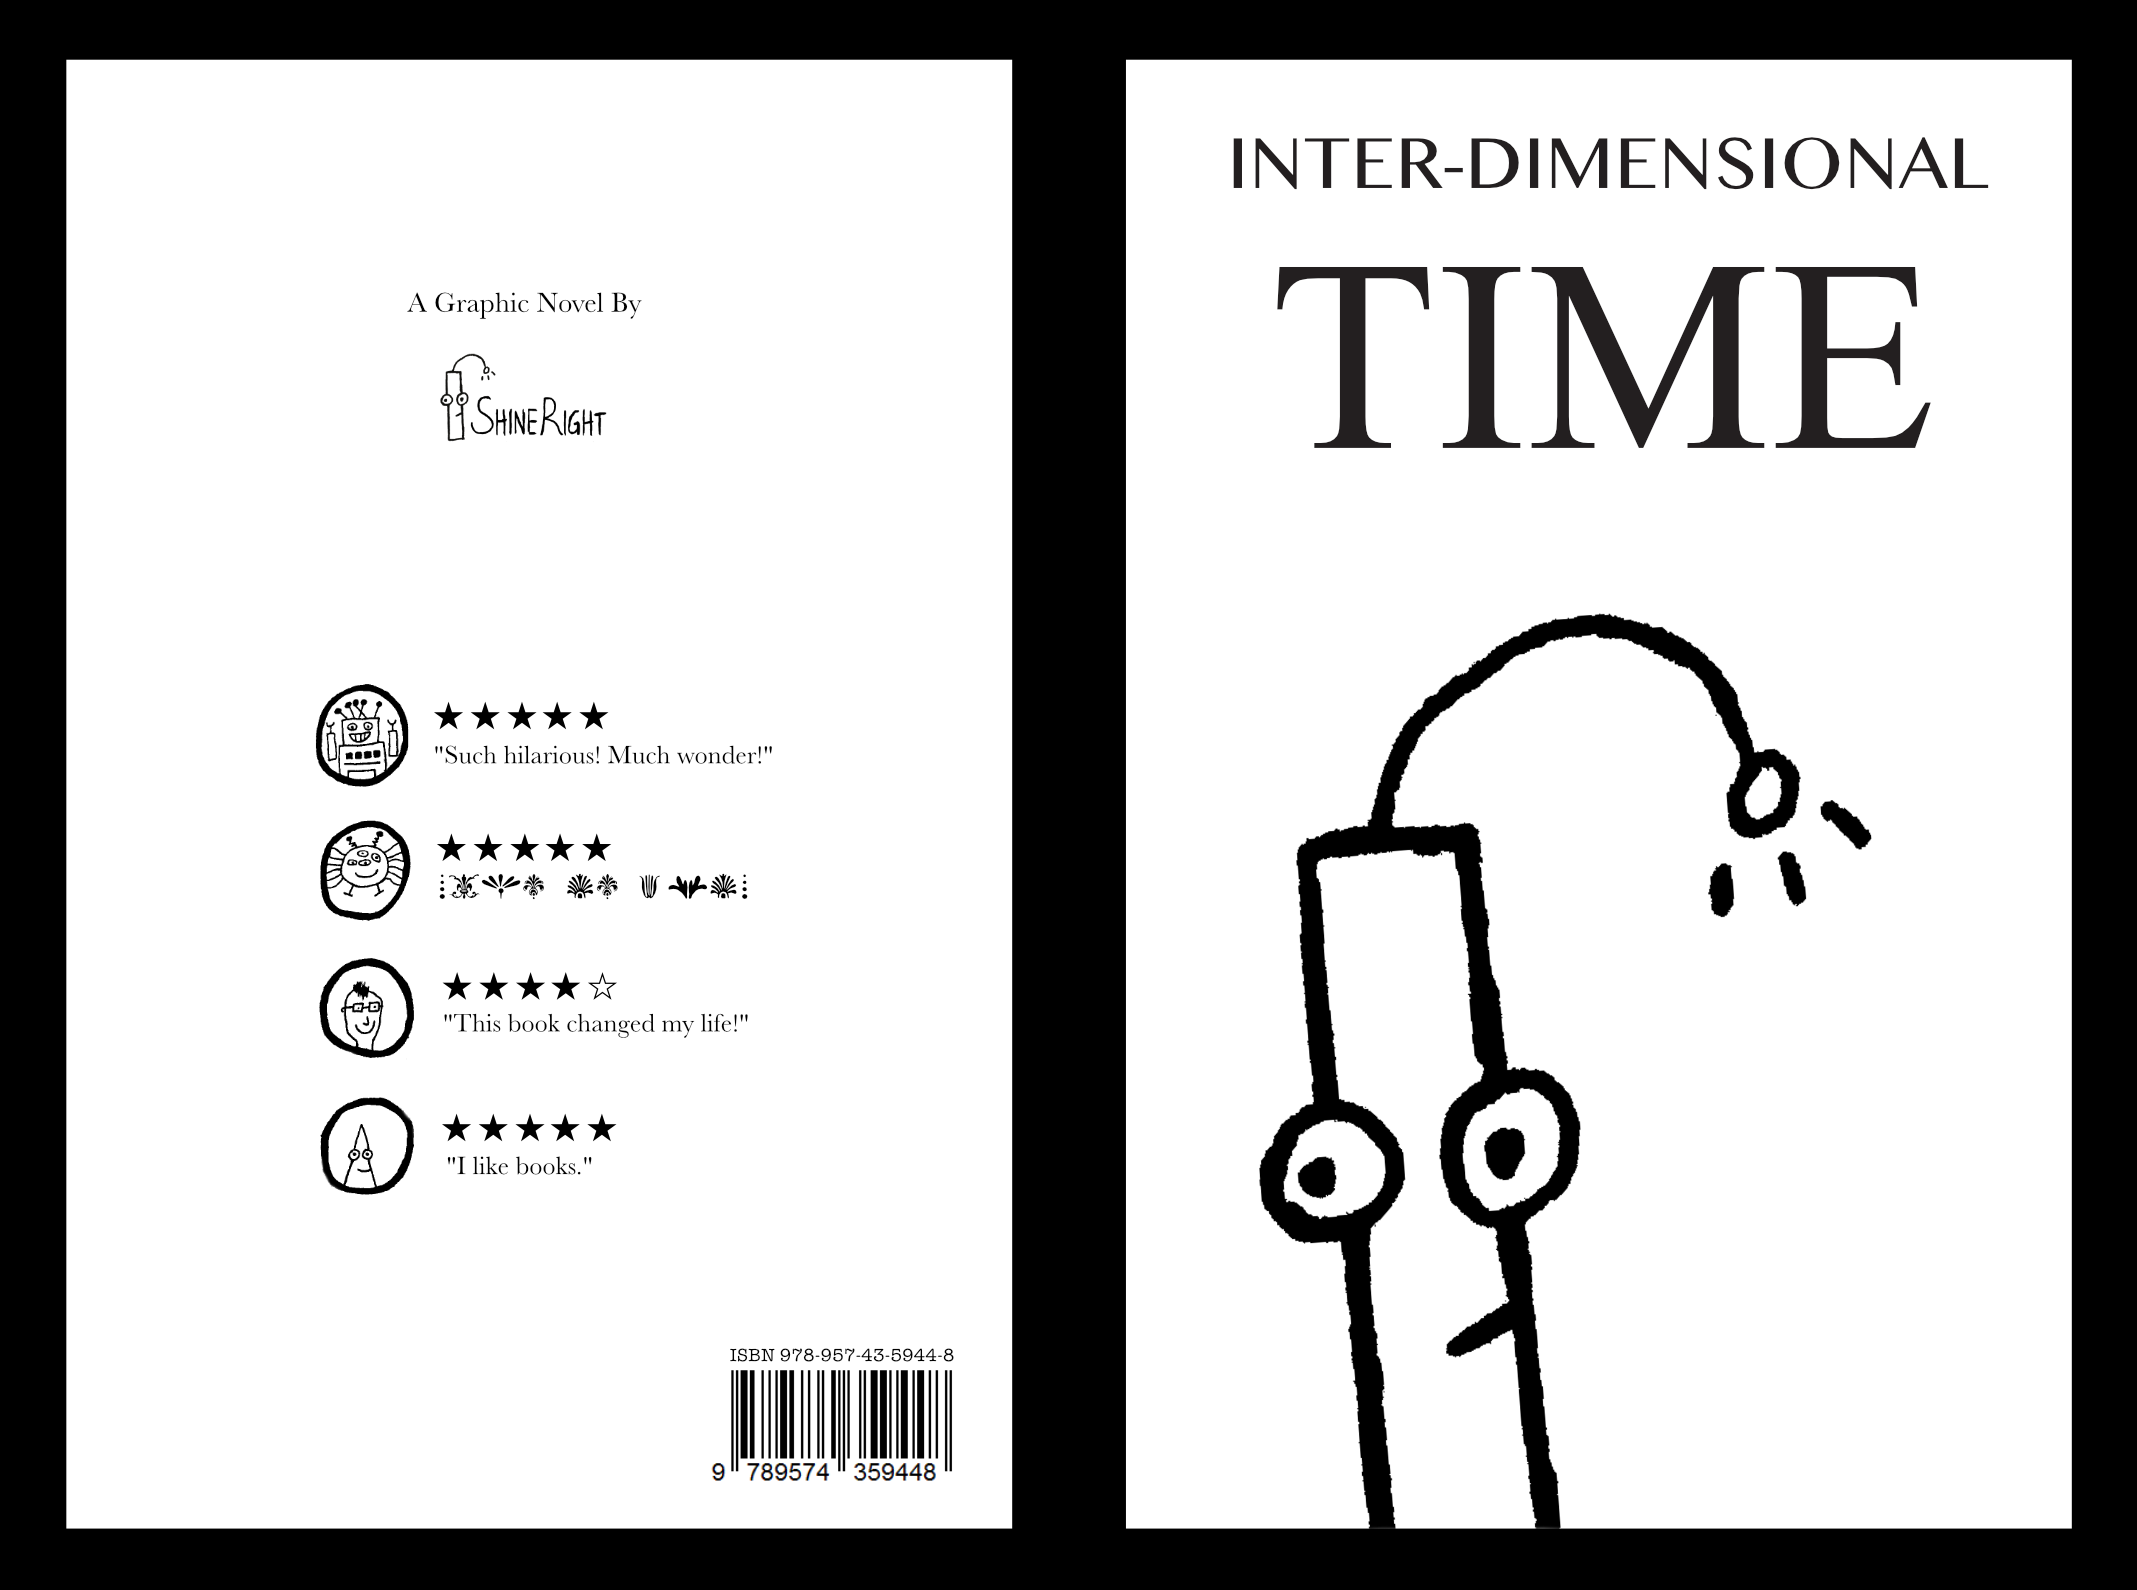 Inter-dimensional Time